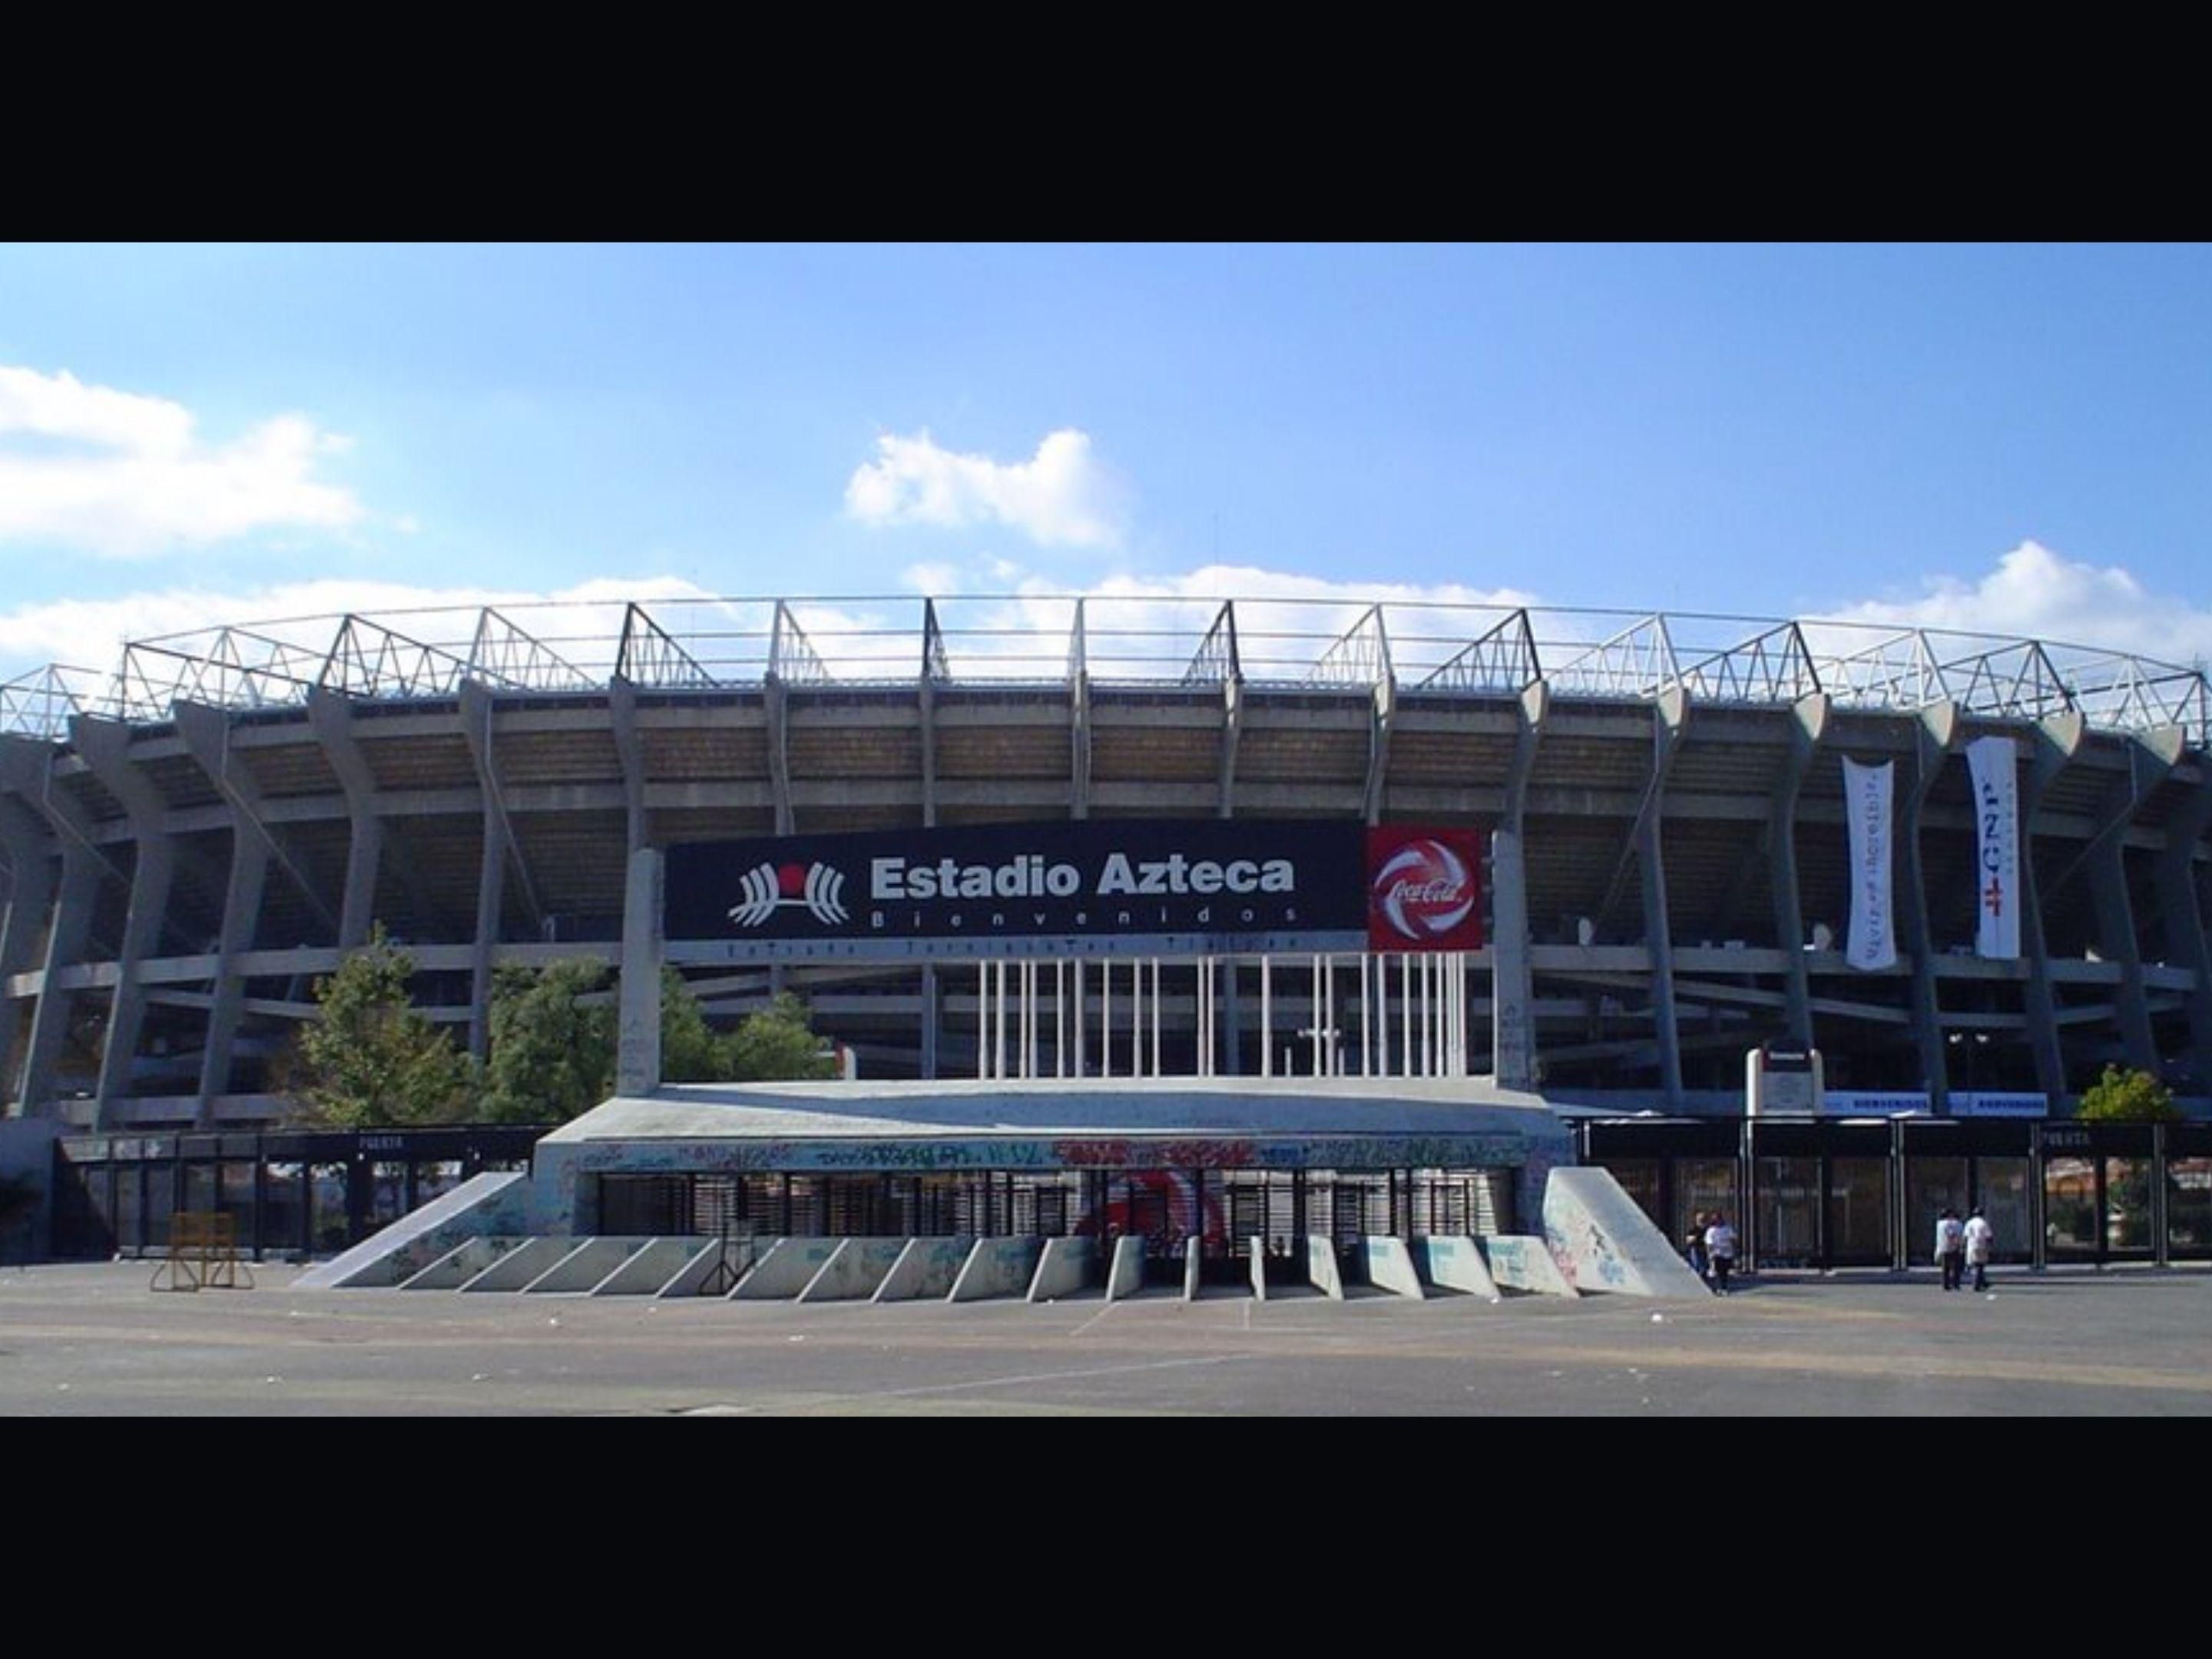 Just 15 minutes from the only stadium in the world to have hosted two FIFA World Cup finals. In the Mexico 70 and Mexico 86 Championships. It also hosts international concerts.
The stadium is owned by the Mexican company Televisa.